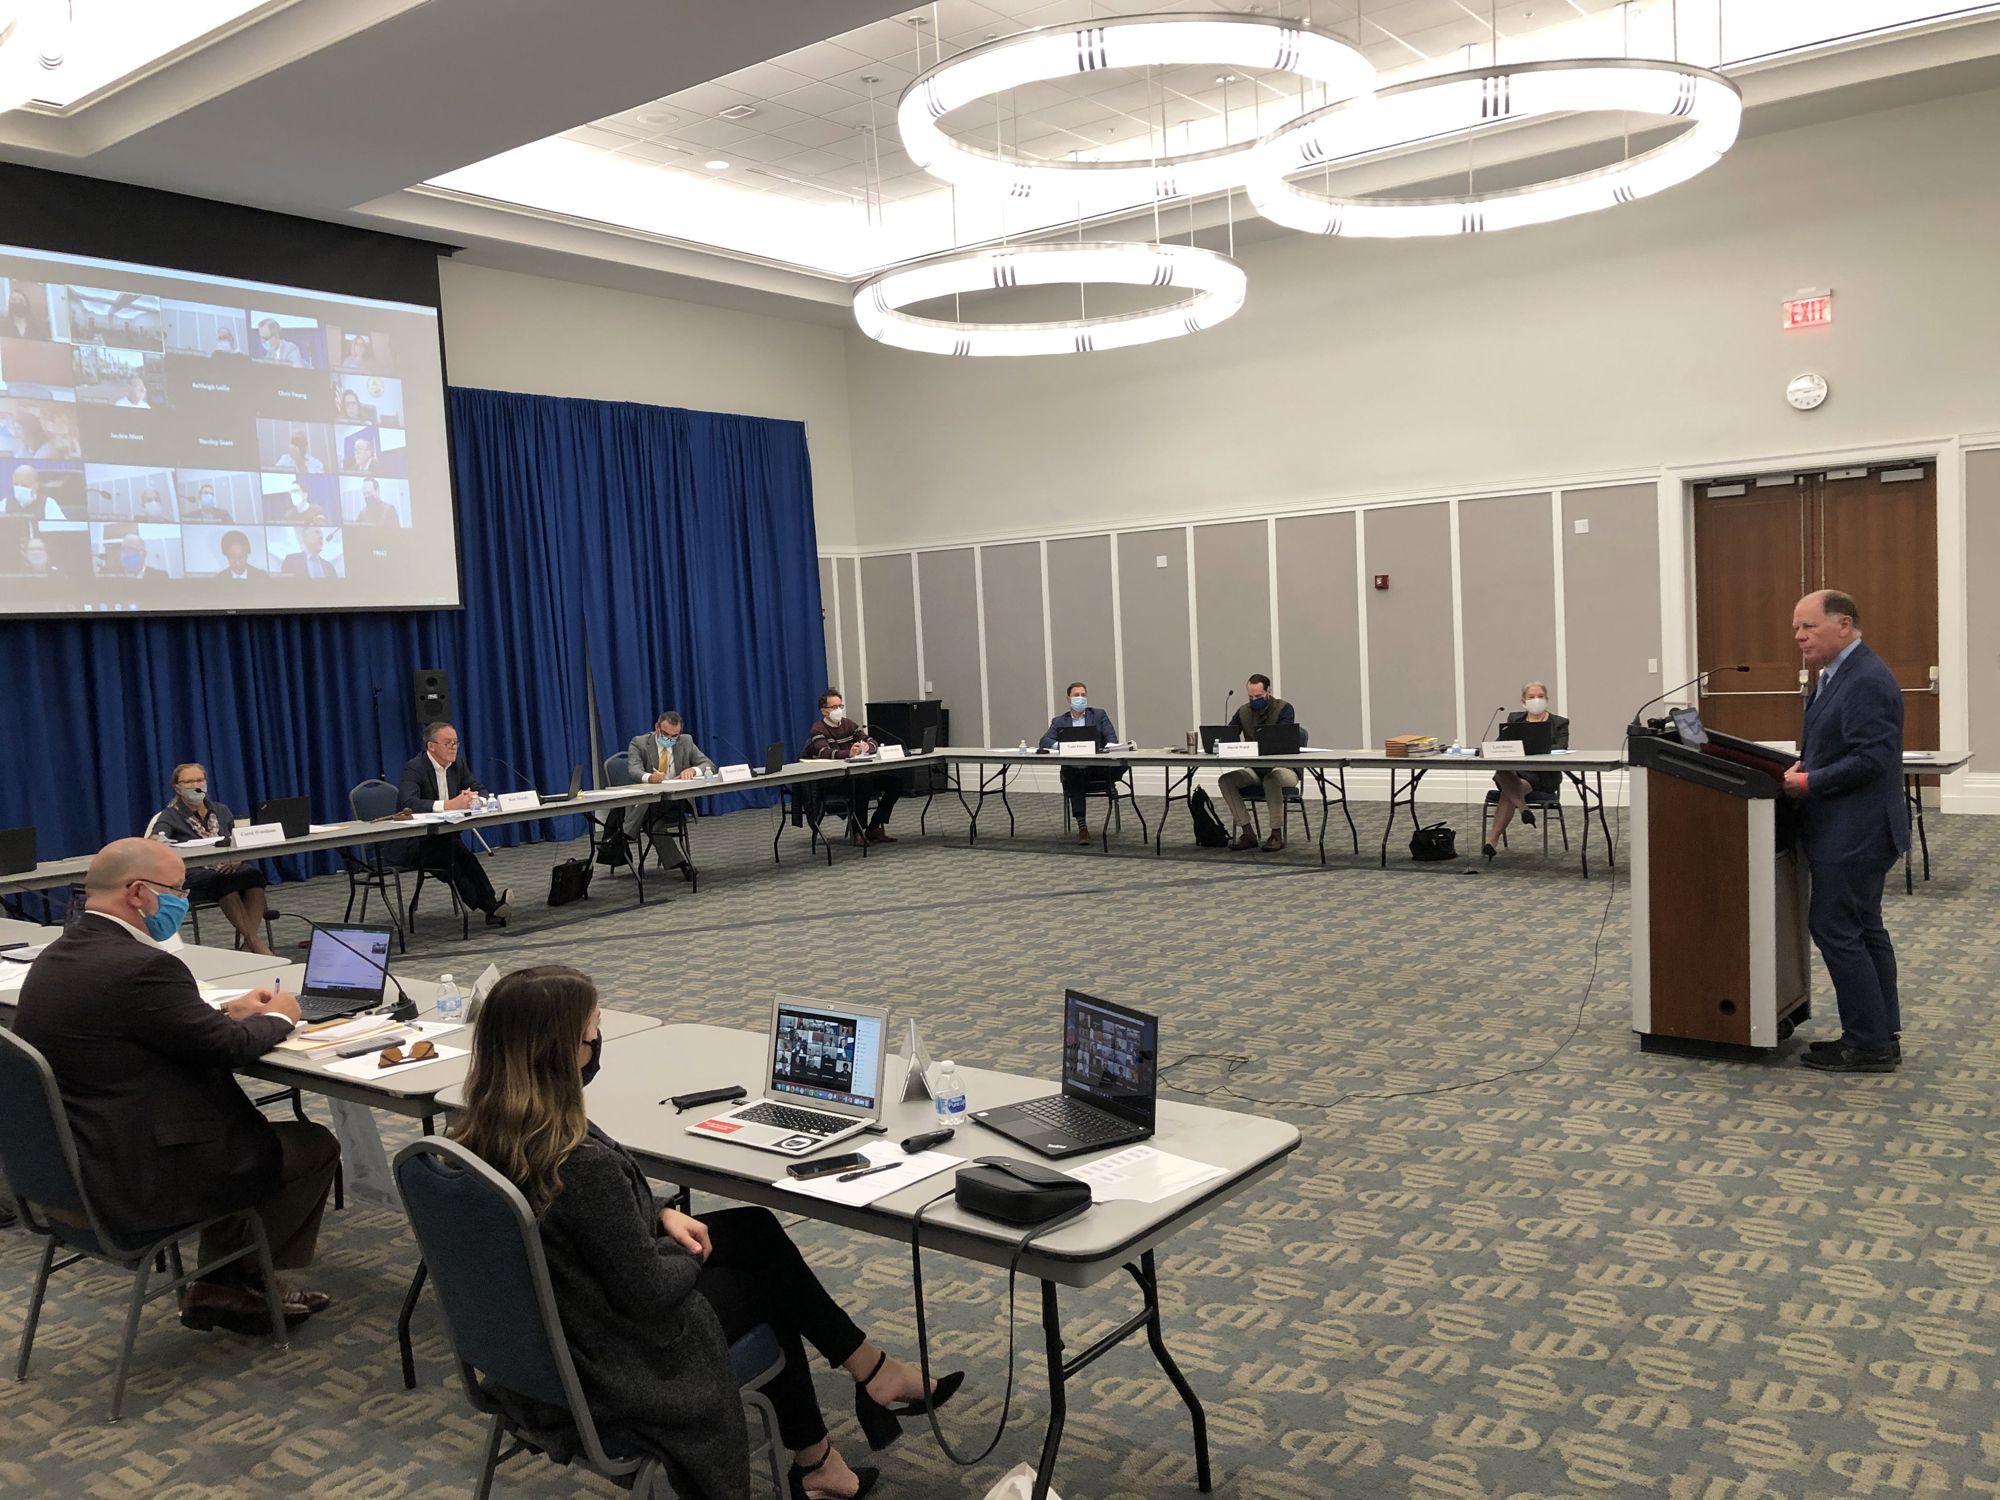 The Downtown Investment Authority met for met for four hours at the Main Library Downtown to discuss and debate the $245.3 million city incentives package and contract for Lot J.